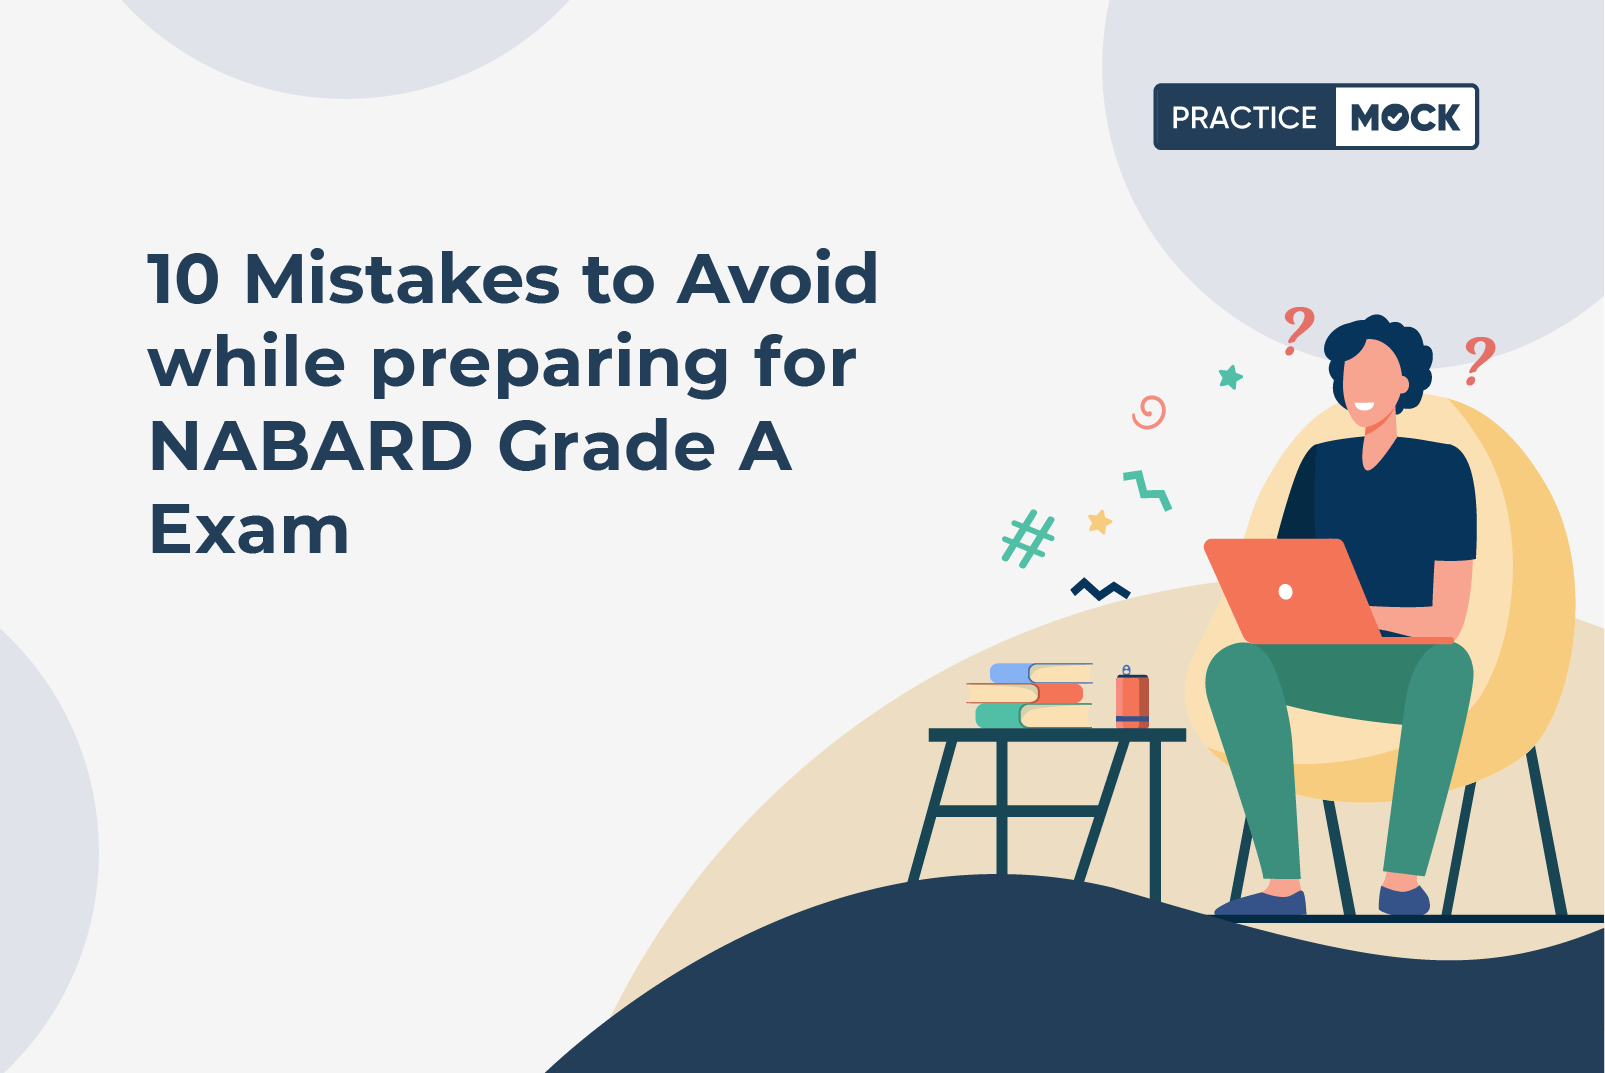 10 Mistakes to Avoid while preparing for NABARD Grade A Exam